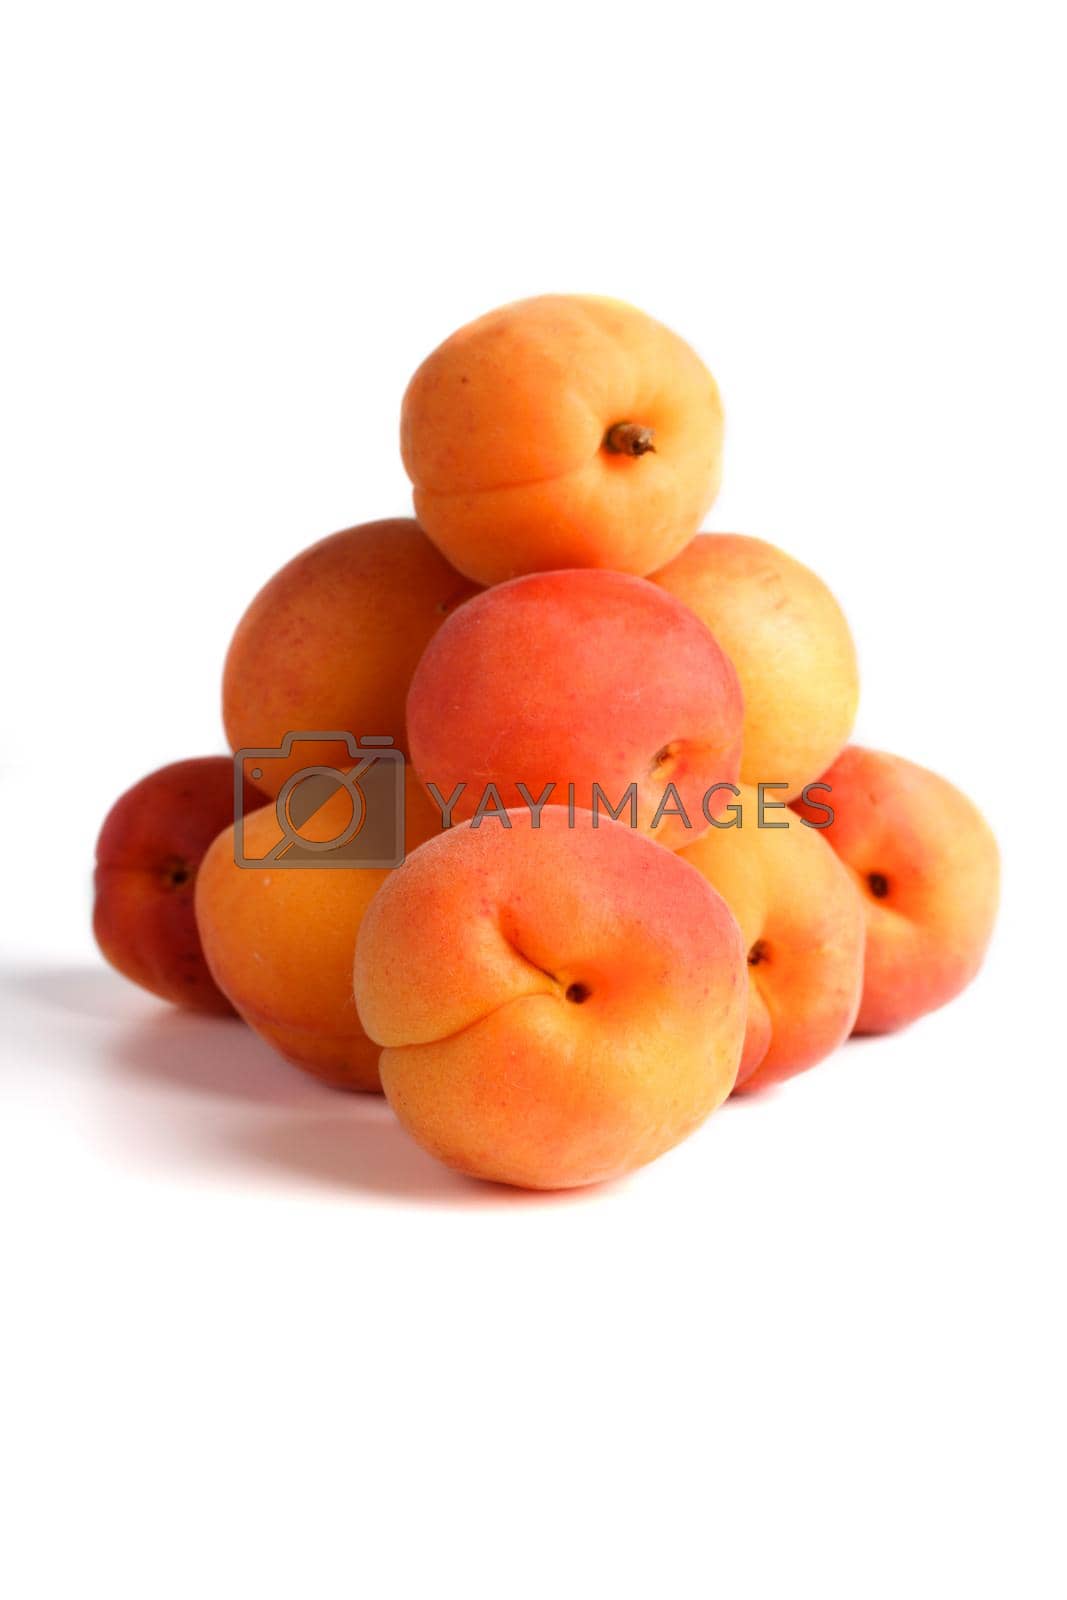 Royalty free image of Peach by moodboard